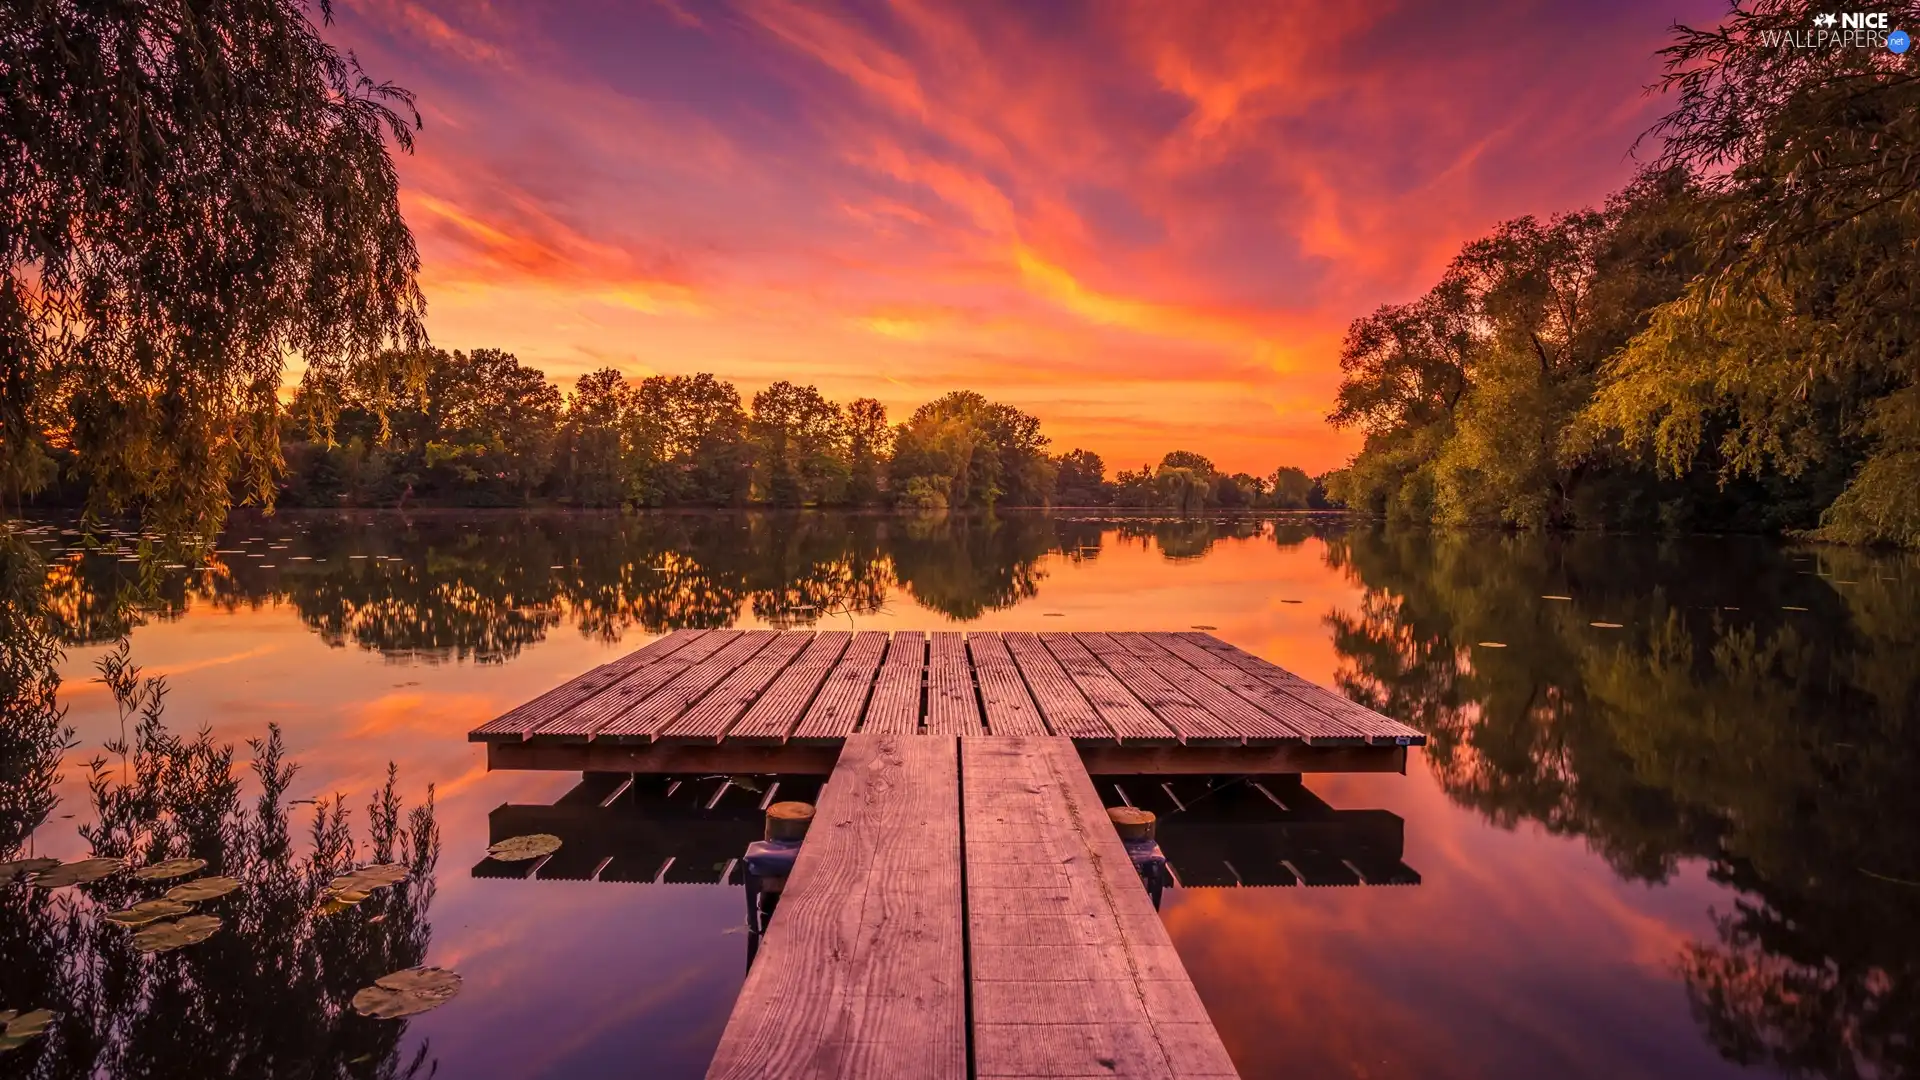 Platform, Great Sunsets, trees, viewes, lake